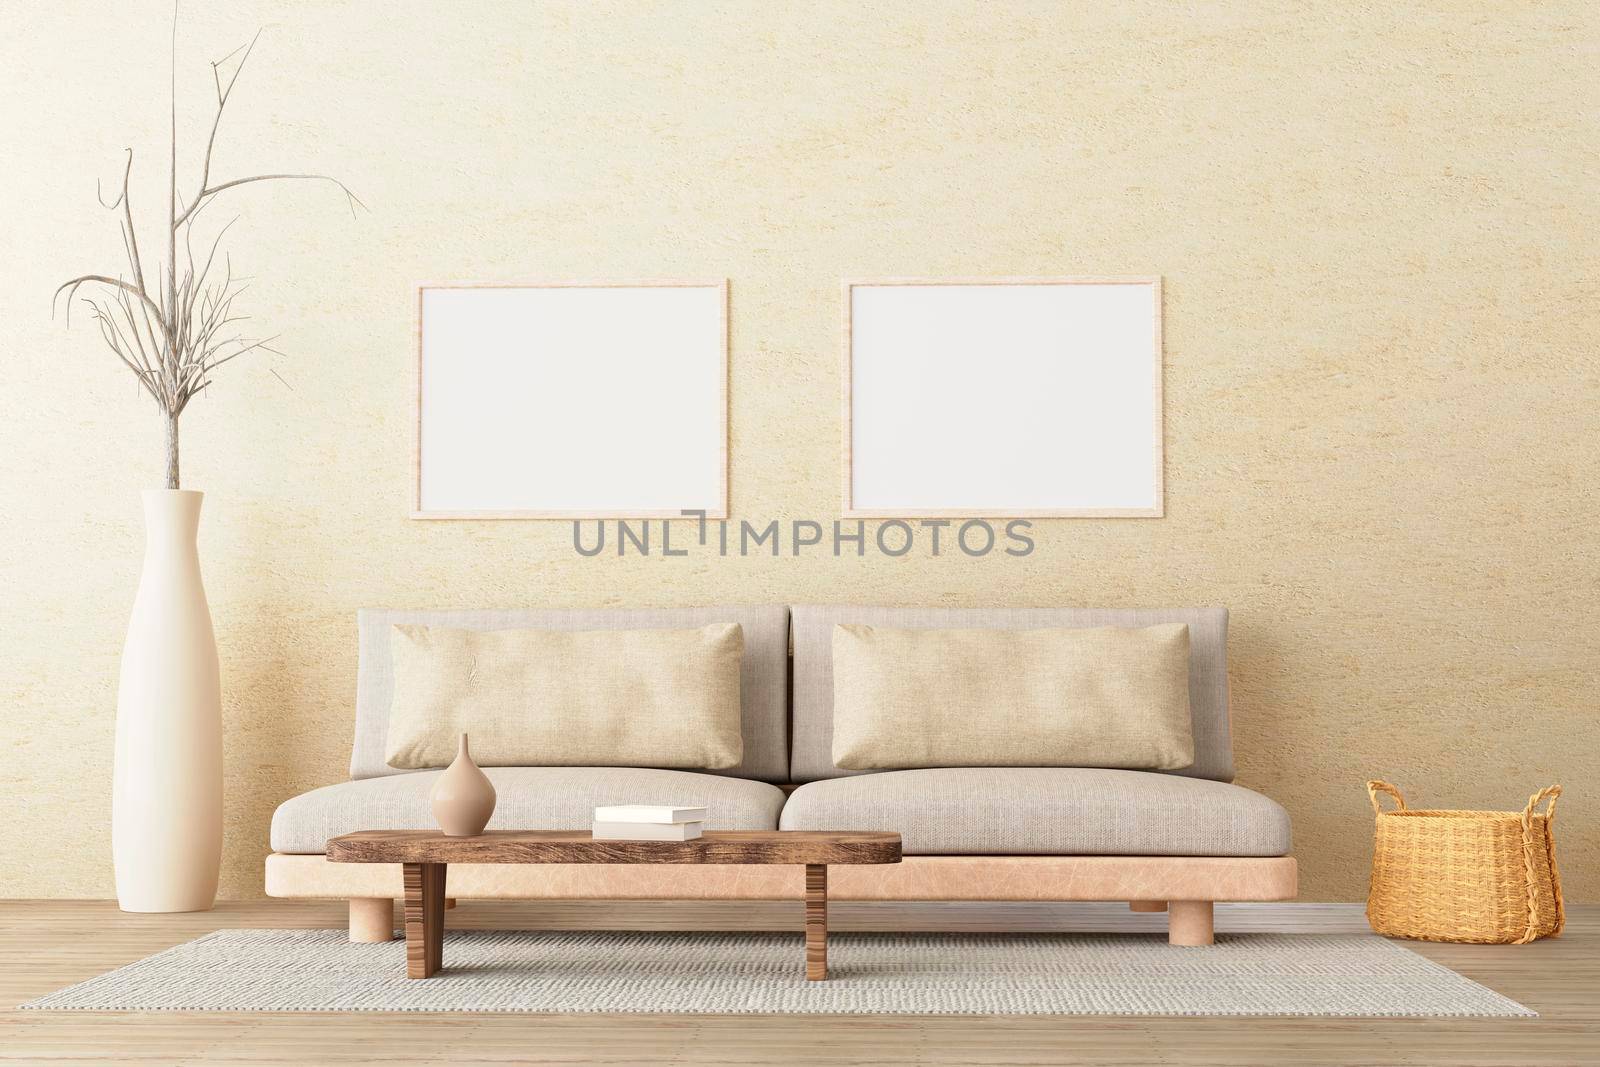 Two horizontal posters mockup in neutral style interior living room with low sofa, ceramic jug, side table, wicker basket and books on empty concrete wall background. 3d illustration. by raferto1973